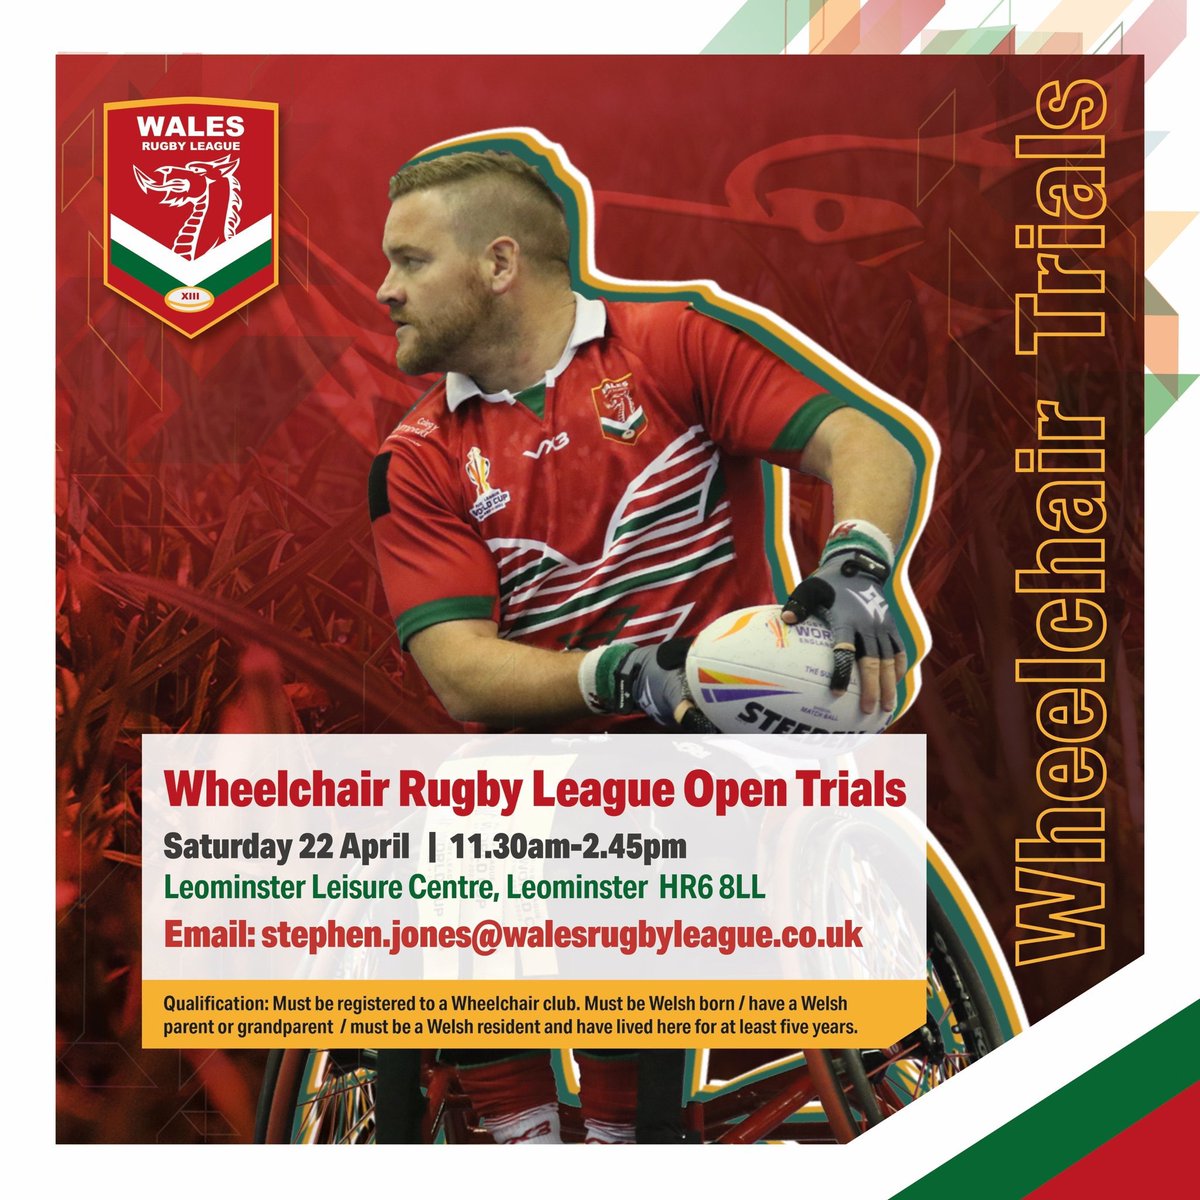 Wales Wheelchair Rugby League Trials | Treialon Rygbi'r Gynghrair Cymru Cadair Olwyn🏴󠁧󠁢󠁷󠁬󠁳󠁿

Are you Welsh qualified and playing Wheelchair Rugby League? Why not trial for the #CymruRL
@intRL side.  See the details below and click on the link to register...

wrl.wales/play-wheelchai…